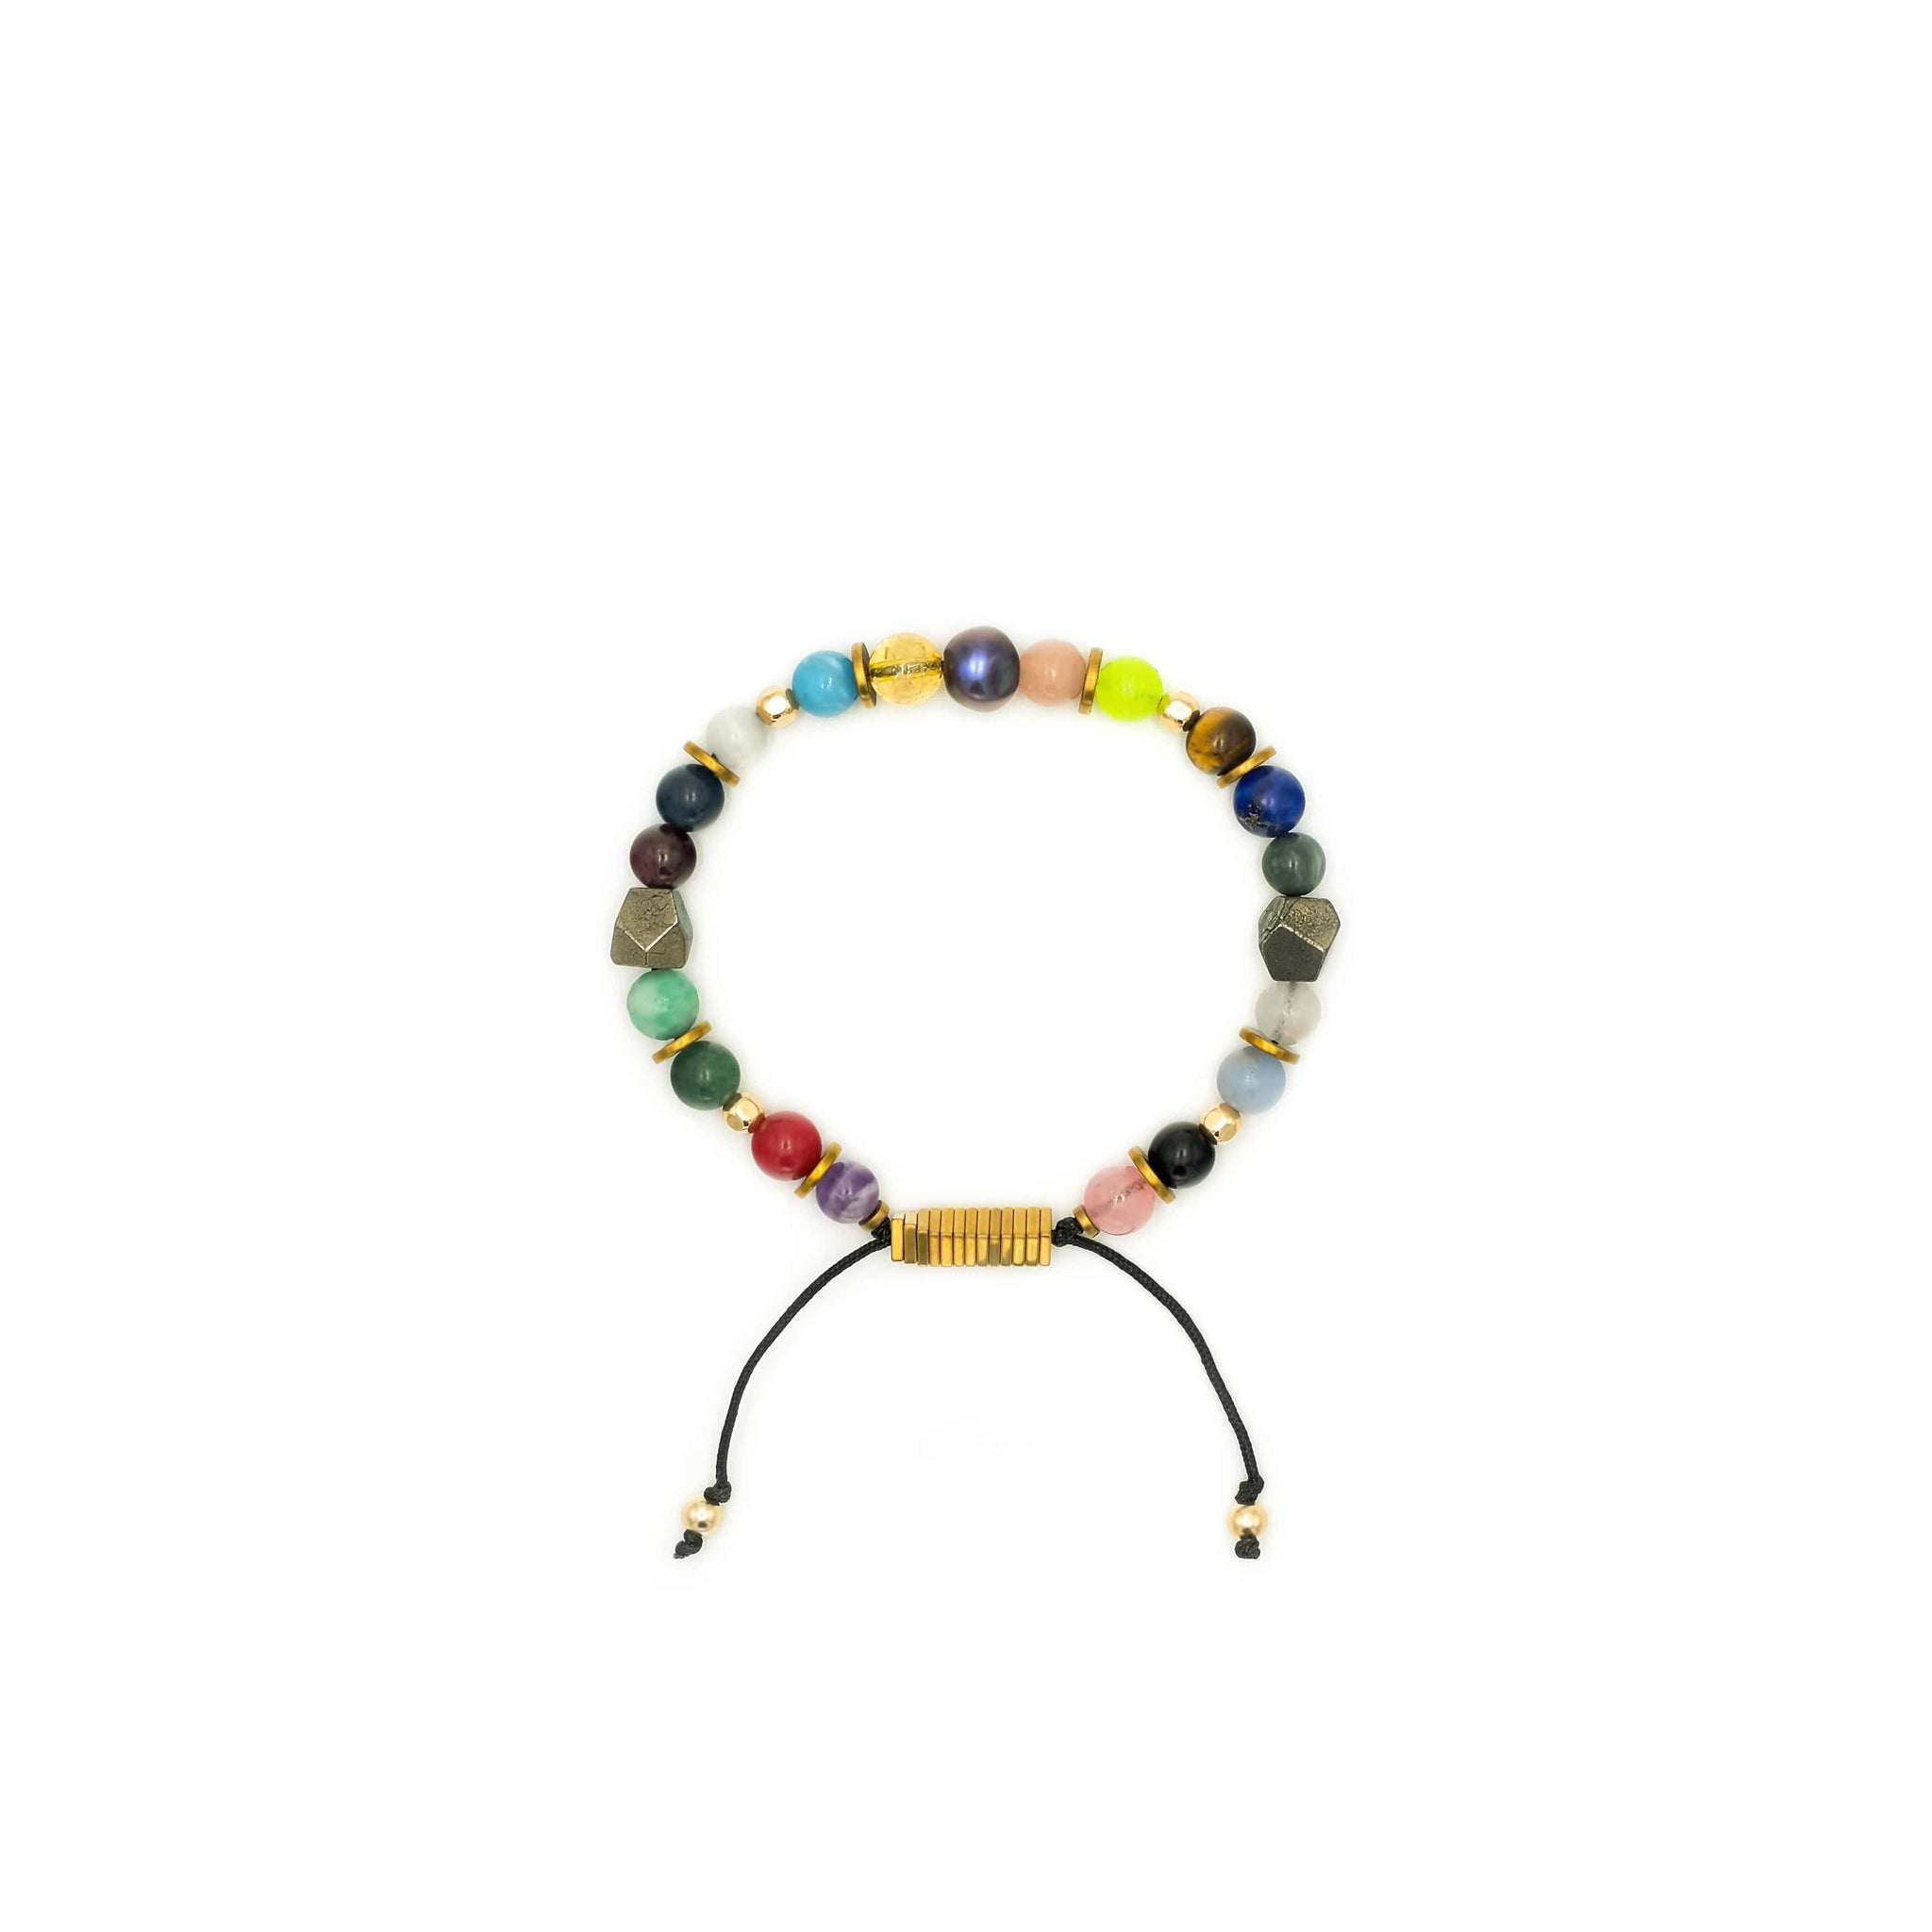 Handcrafted designer stone vibe jewelry LGBTQ Pride for a cause - Popvibe